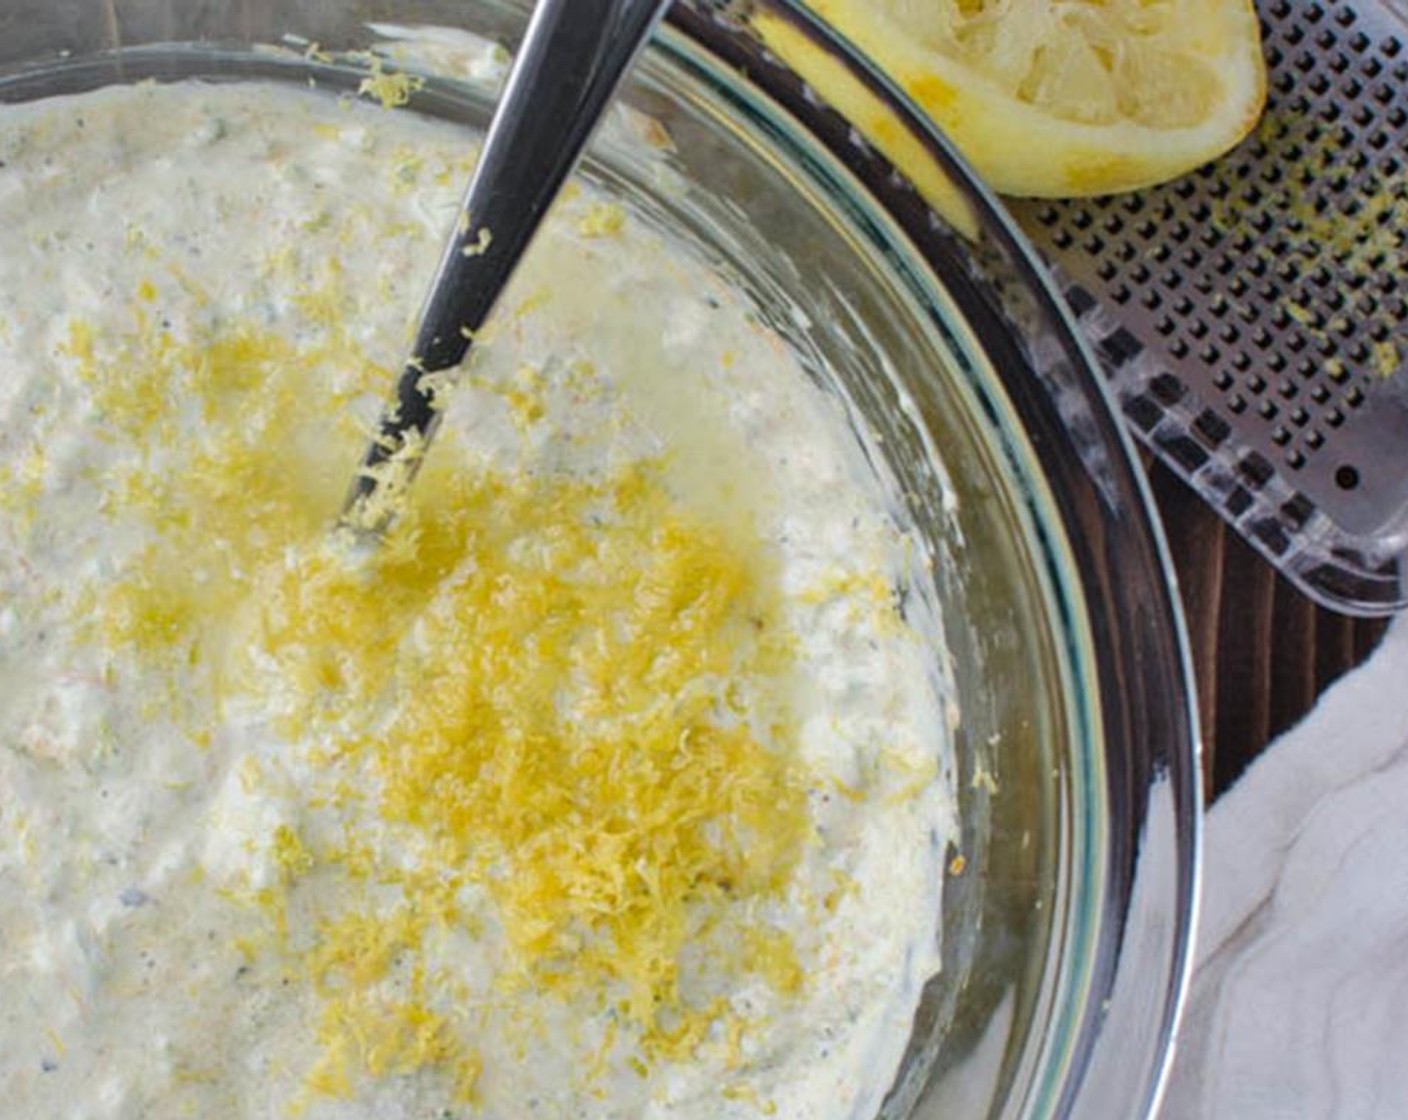 step 6 Add the Mayonnaise (1 1/2 cups). Using a microplane grater, zest the Lemon (1) and add it to the bowl. Cut the lemon in half and squeeze the juice from half the lemon into the mixture. Season with Kosher Salt (1/4 tsp). Refrigerate until ready to use.